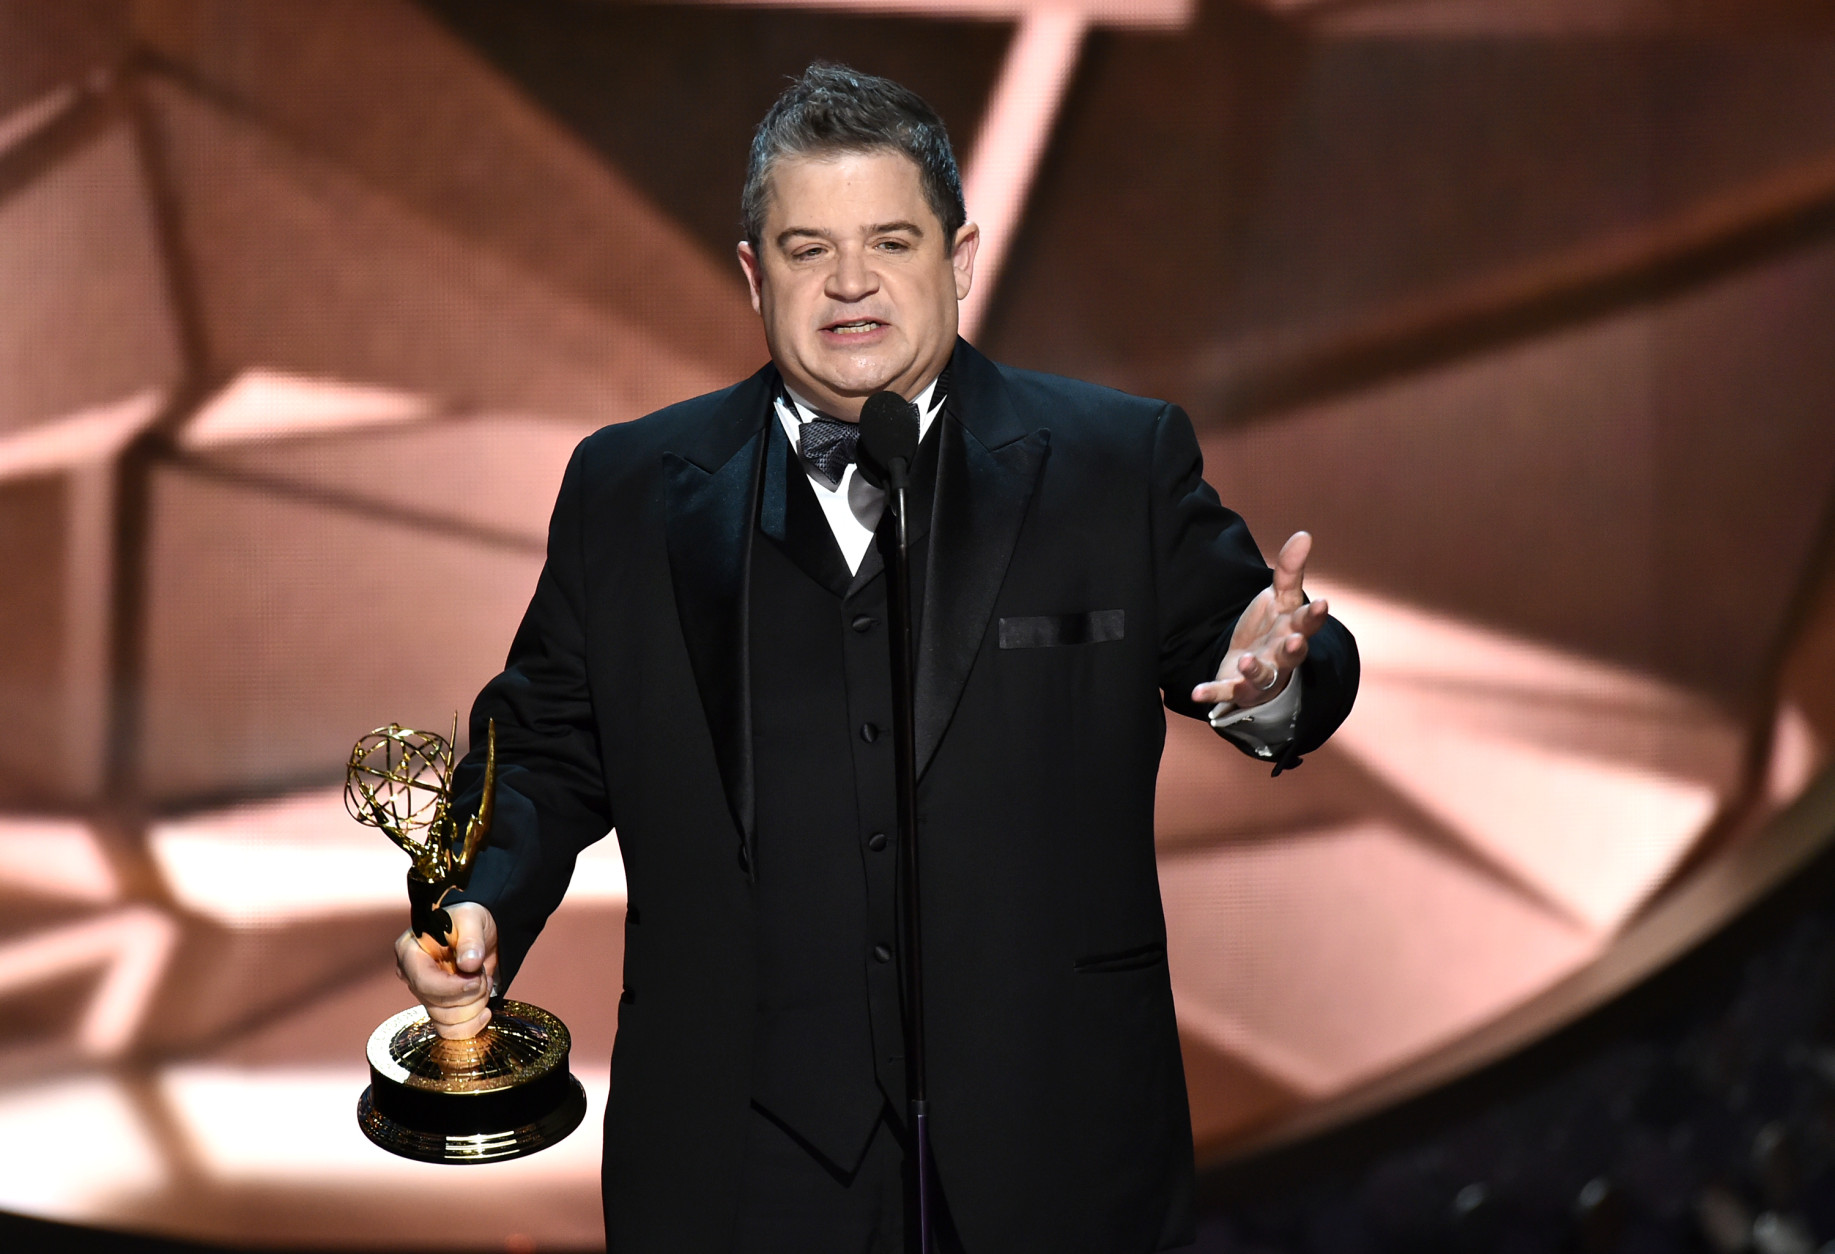 Patton Oswalt accepts the award for outstanding writing for a variety series for Patton Oswalt: Talking for Clapping at the 68th Primetime Emmy Awards on Sunday, Sept. 18, 2016, at the Microsoft Theater in Los Angeles. (Photo by Vince Bucci/Invision for the Television Academy/AP Images)